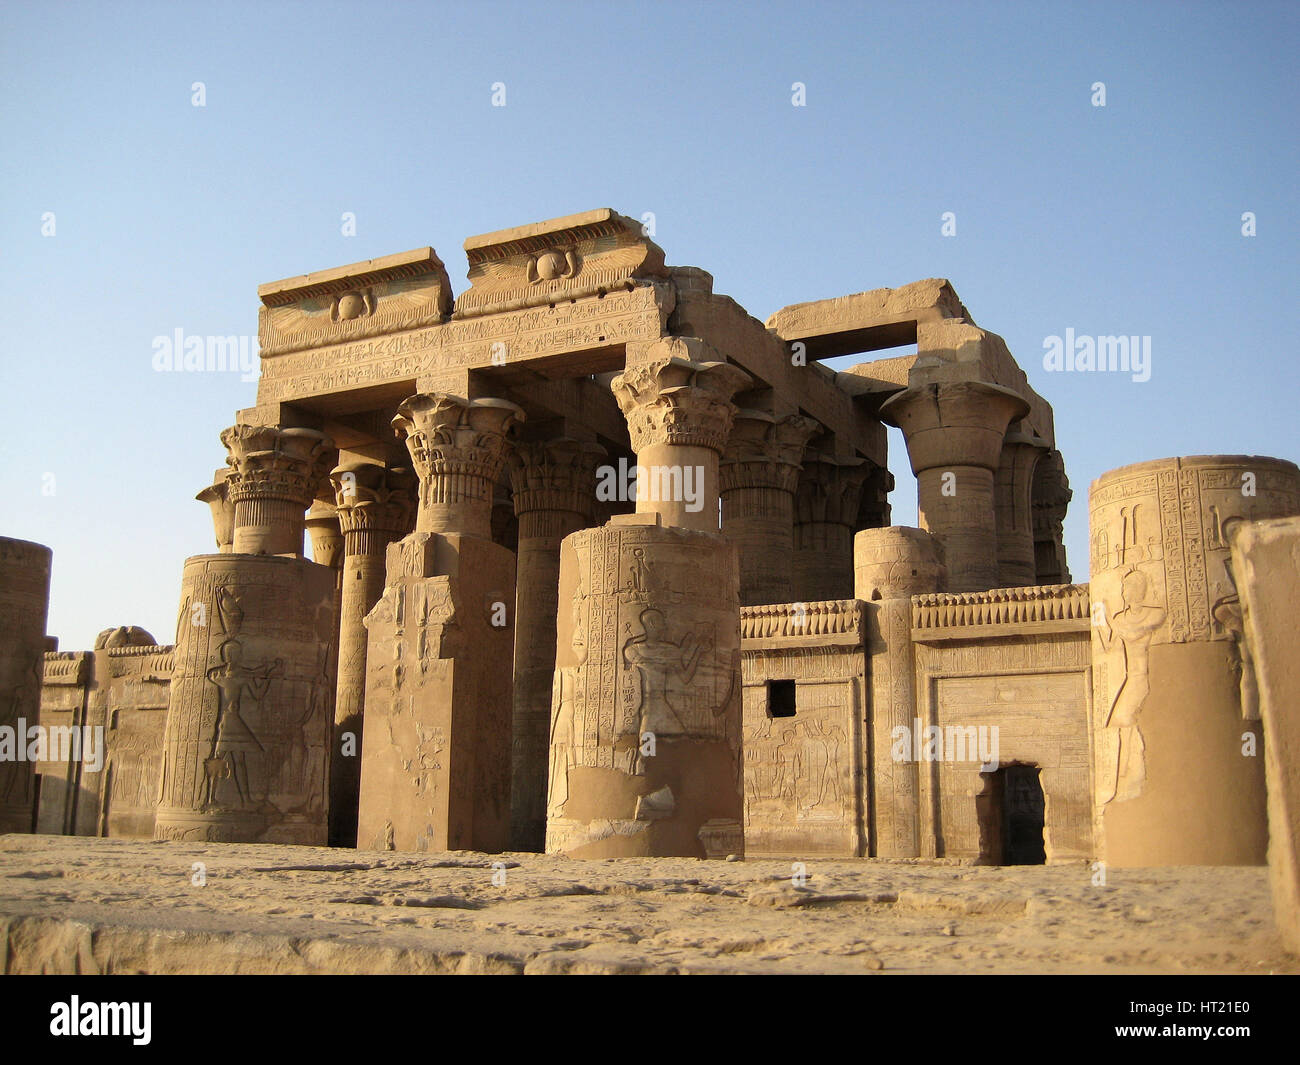 The double temple of Kom Ombo. The southern temple was dedicated to Sobek, the crocodile god of fert Artist: Werner Forman. Stock Photo